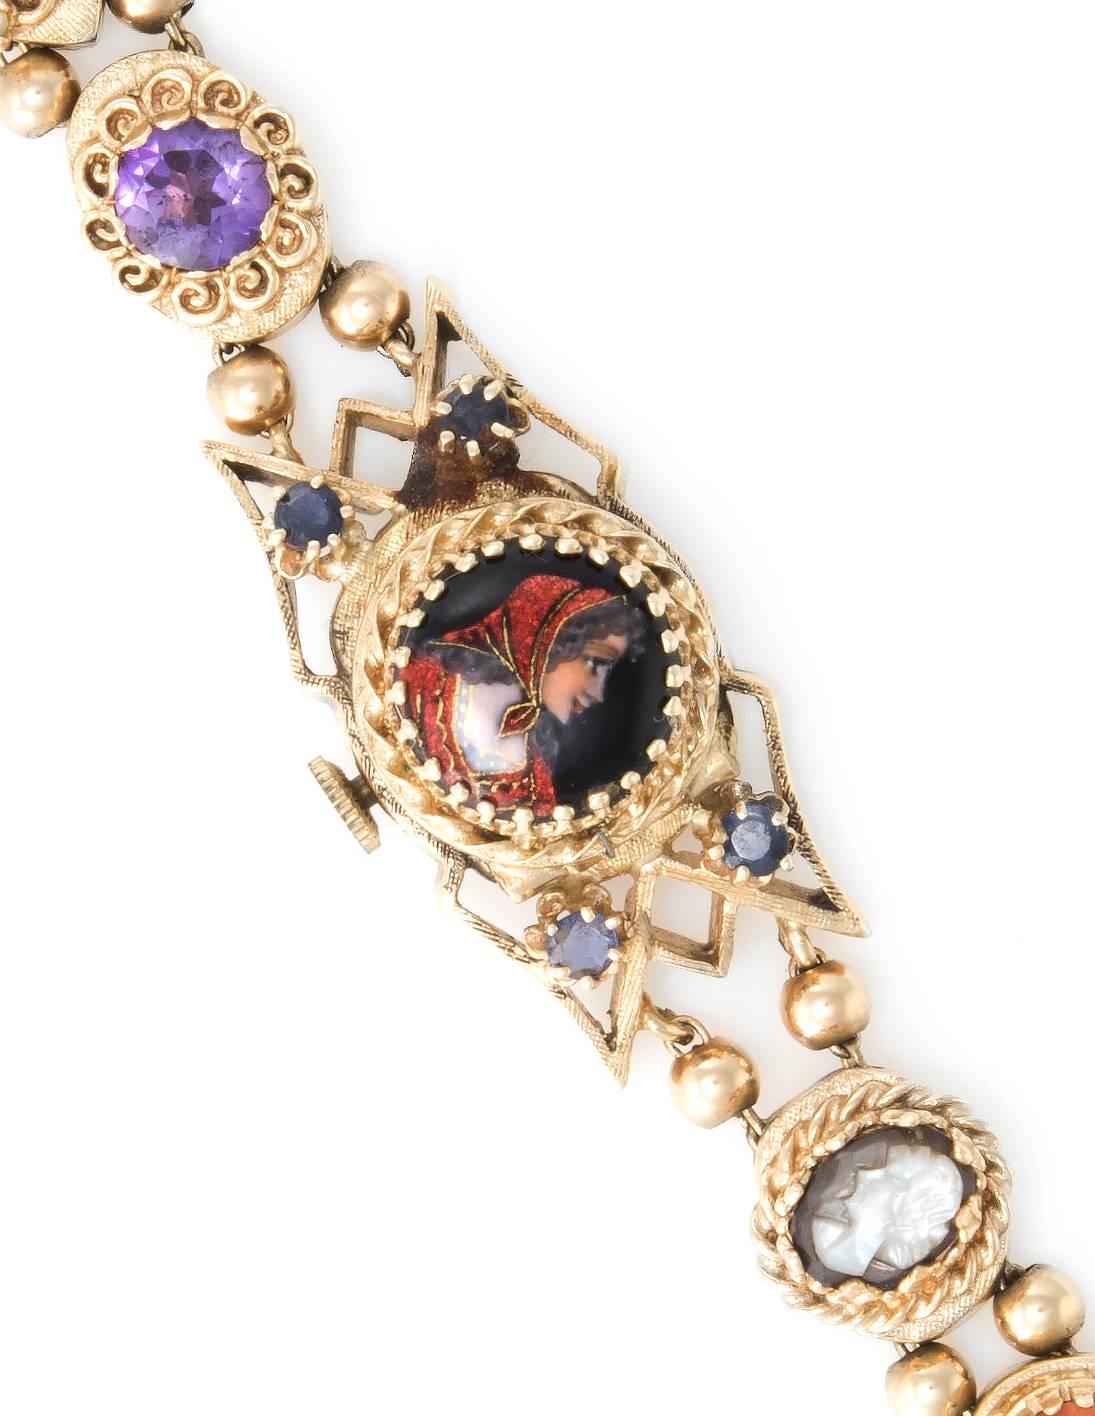 Overview:

Elegant vintage slide watch bracelet (circa 1940s), crafted in 14 karat gold. 

The bracelet features 9 slides set with jewels: turquoise is estimated at 0.05 carats, amethyst is estimated at 1.50  carats, emerald is estimated at 0.08